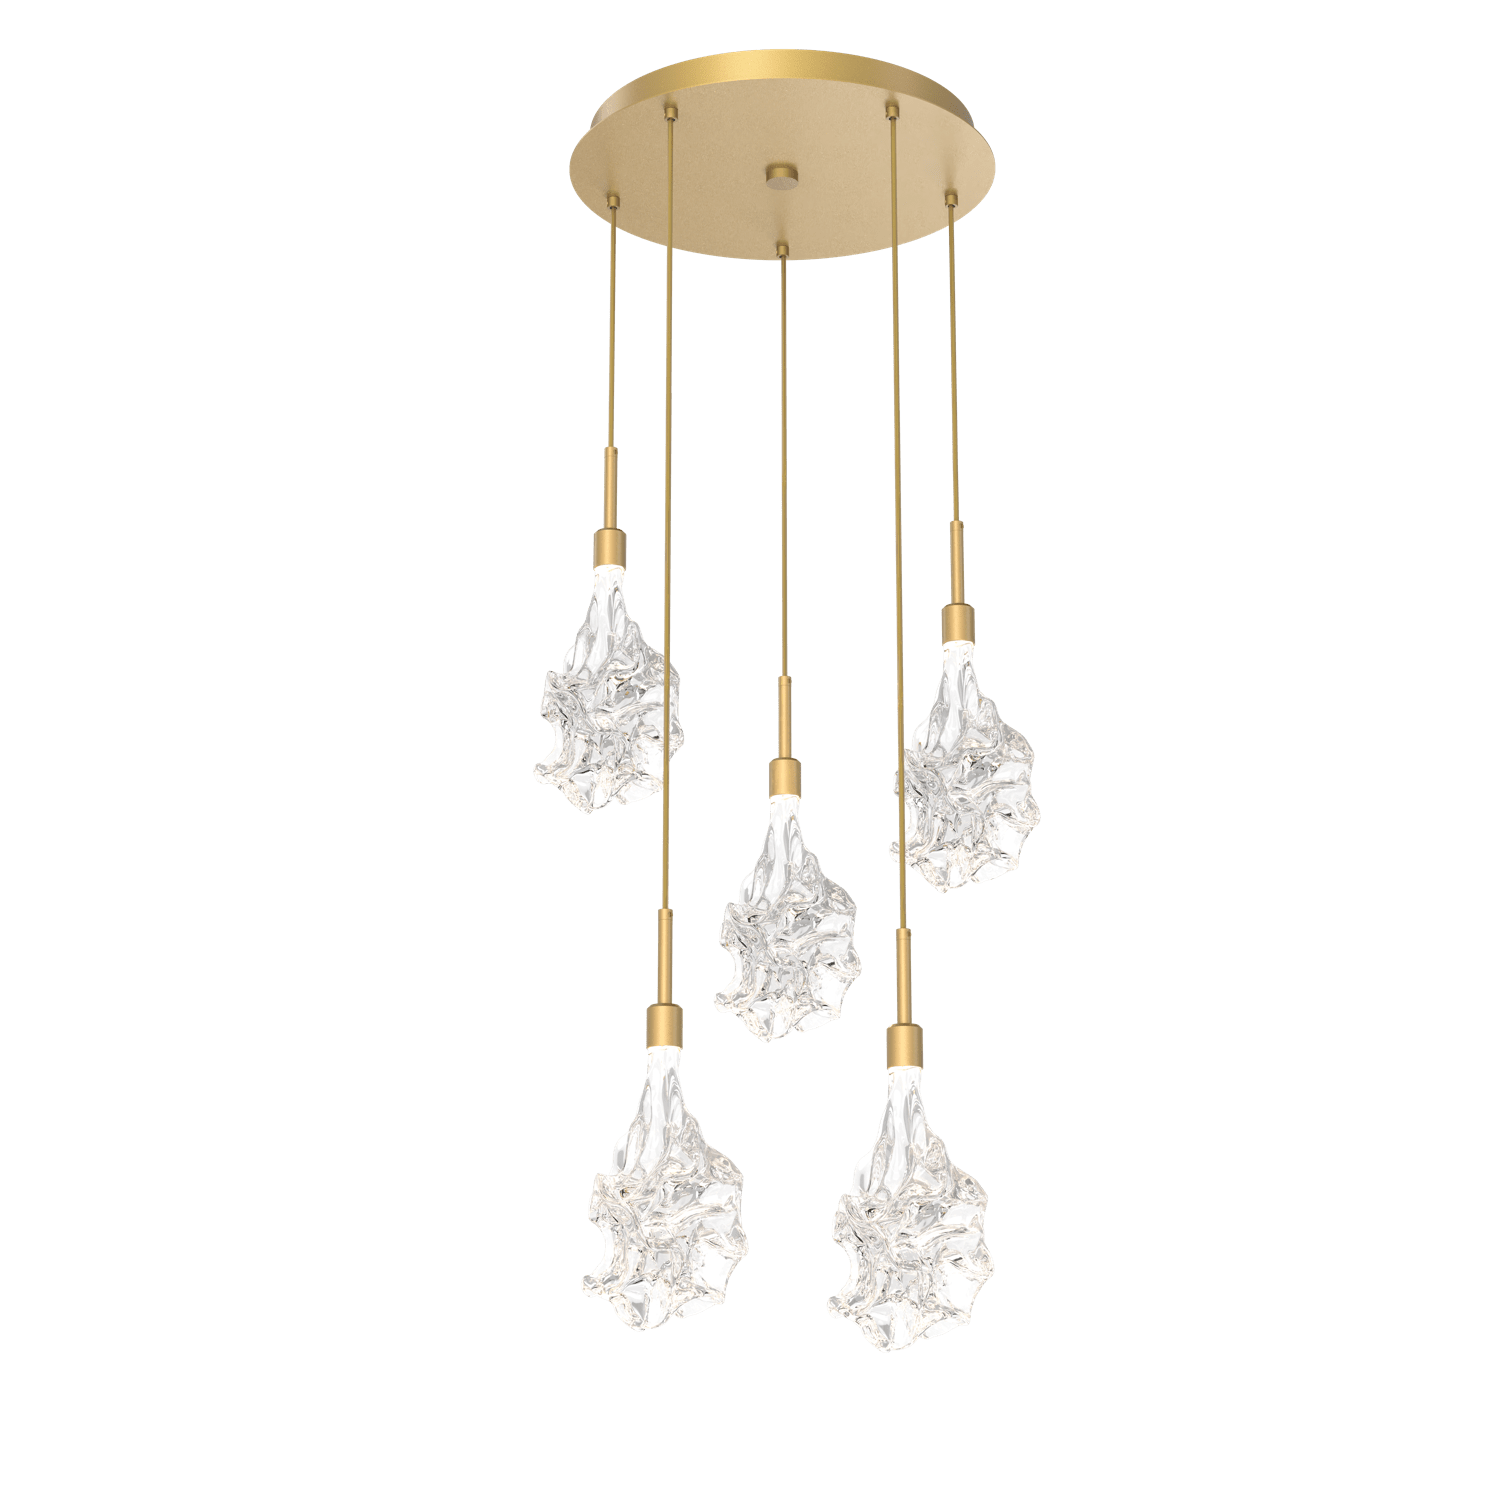 CHB0059-05-GB-Hammerton-Studio-Blossom-5-light-round-pendant-chandelier-with-gilded-brass-finish-and-clear-handblown-crystal-glass-shades-and-LED-lamping